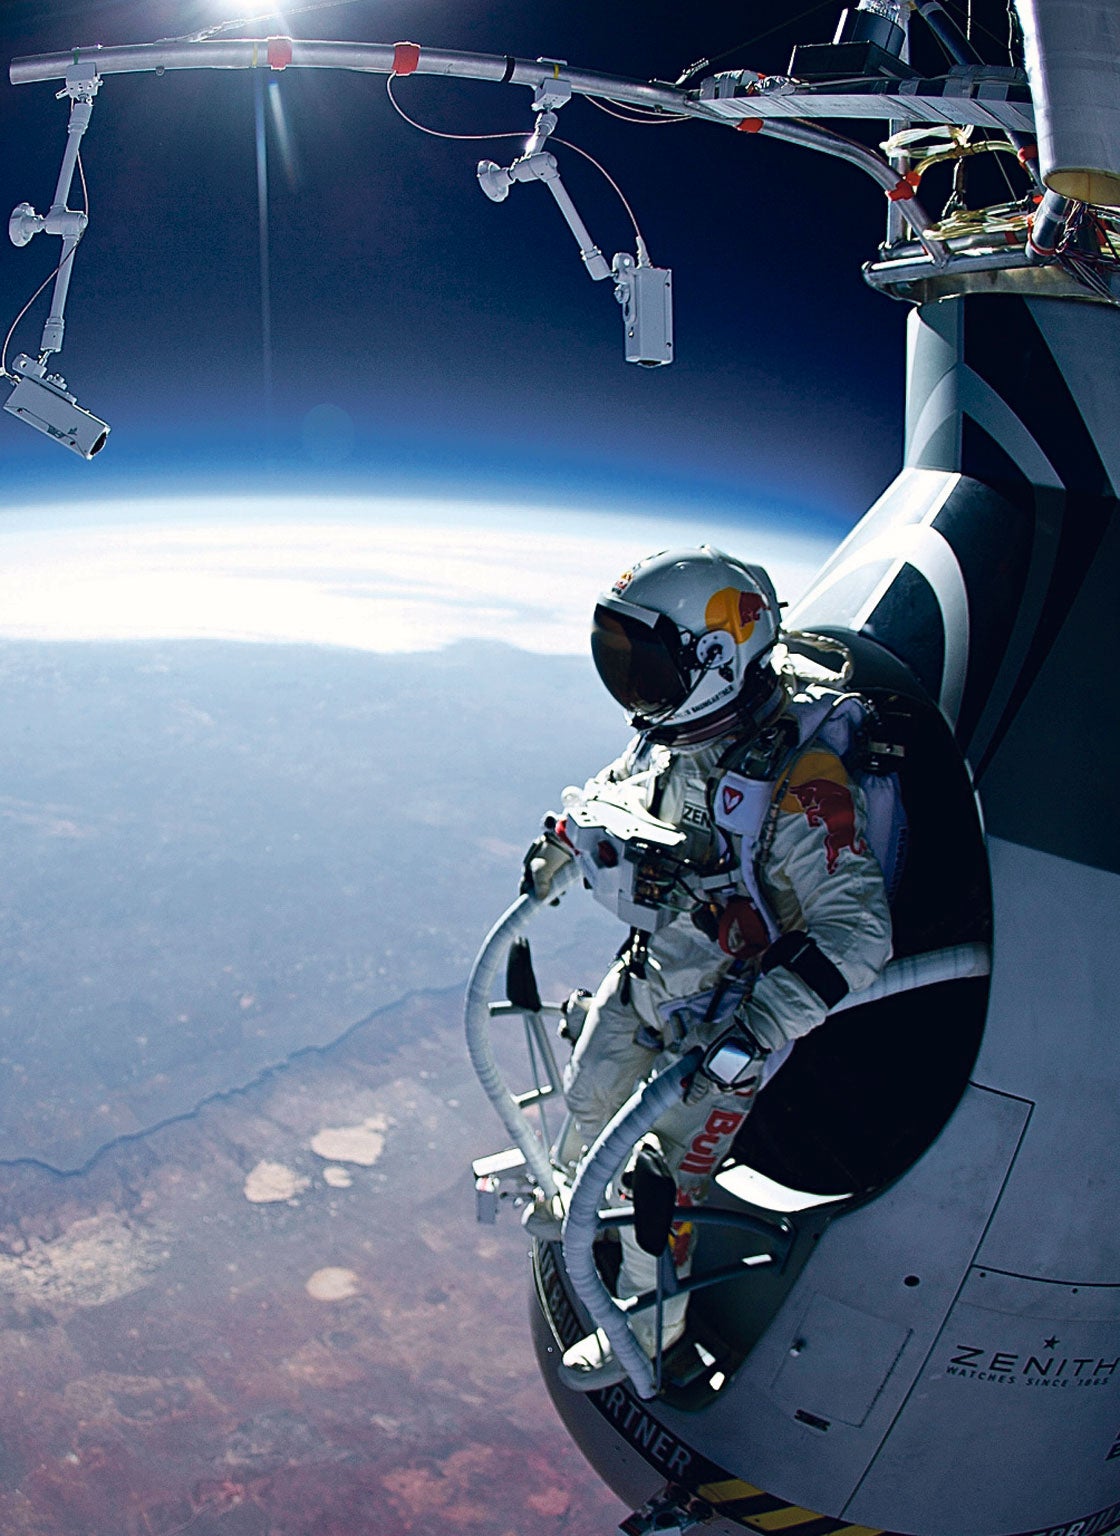 Austrian skydiver Felix Baumgartner when he jumped out of his Red Bull Stratos helium-filled balloon on 14 October 2012